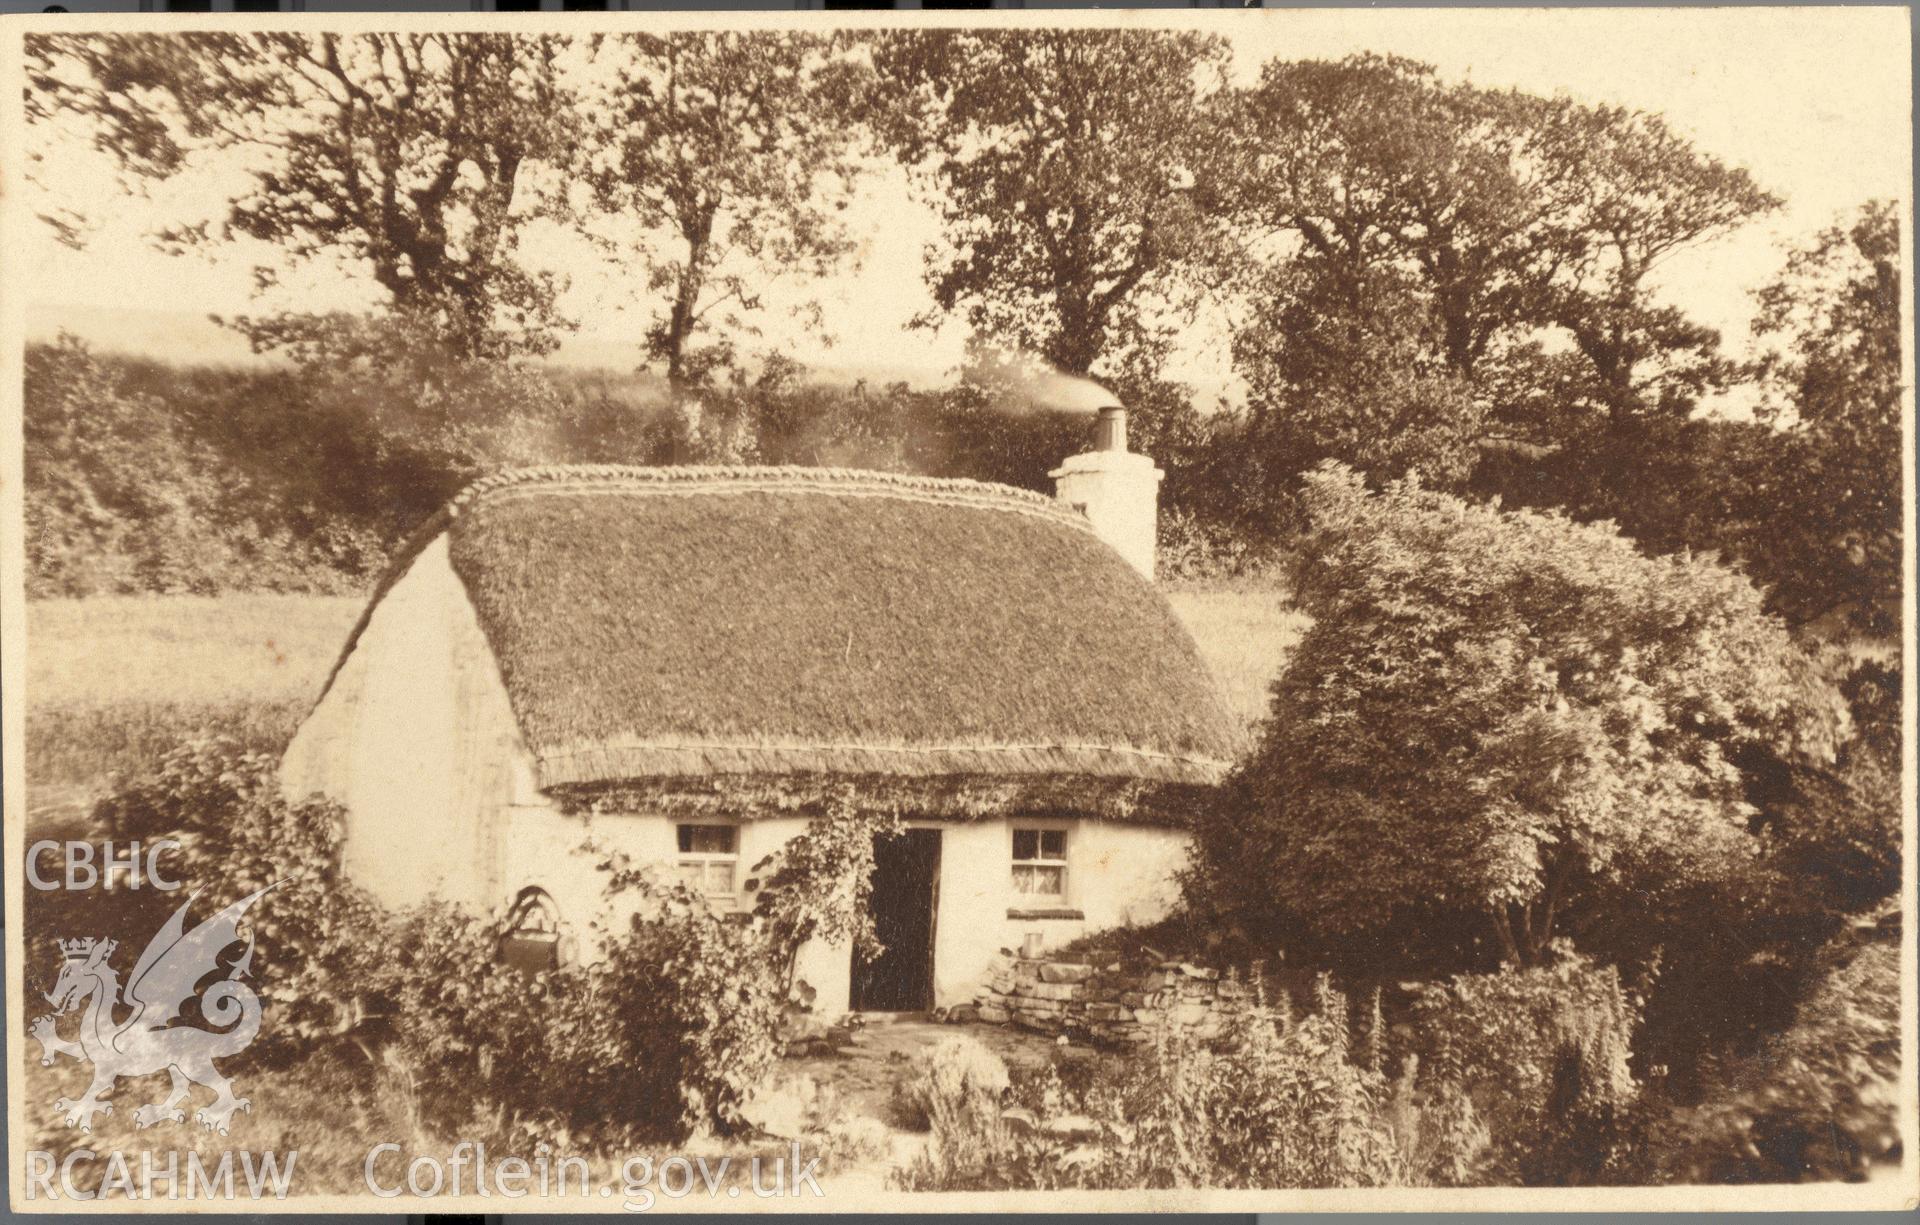 Digitised postcard image of unidentified thatched cottage, Betws-y-coed. Produced by Parks and Gardens Data Services, from an original item in the Peter Davis Collection at Parks and Gardens UK. We hold only web-resolution images of this collection, suitable for viewing on screen and for research purposes only. We do not hold the original images, or publication quality scans.